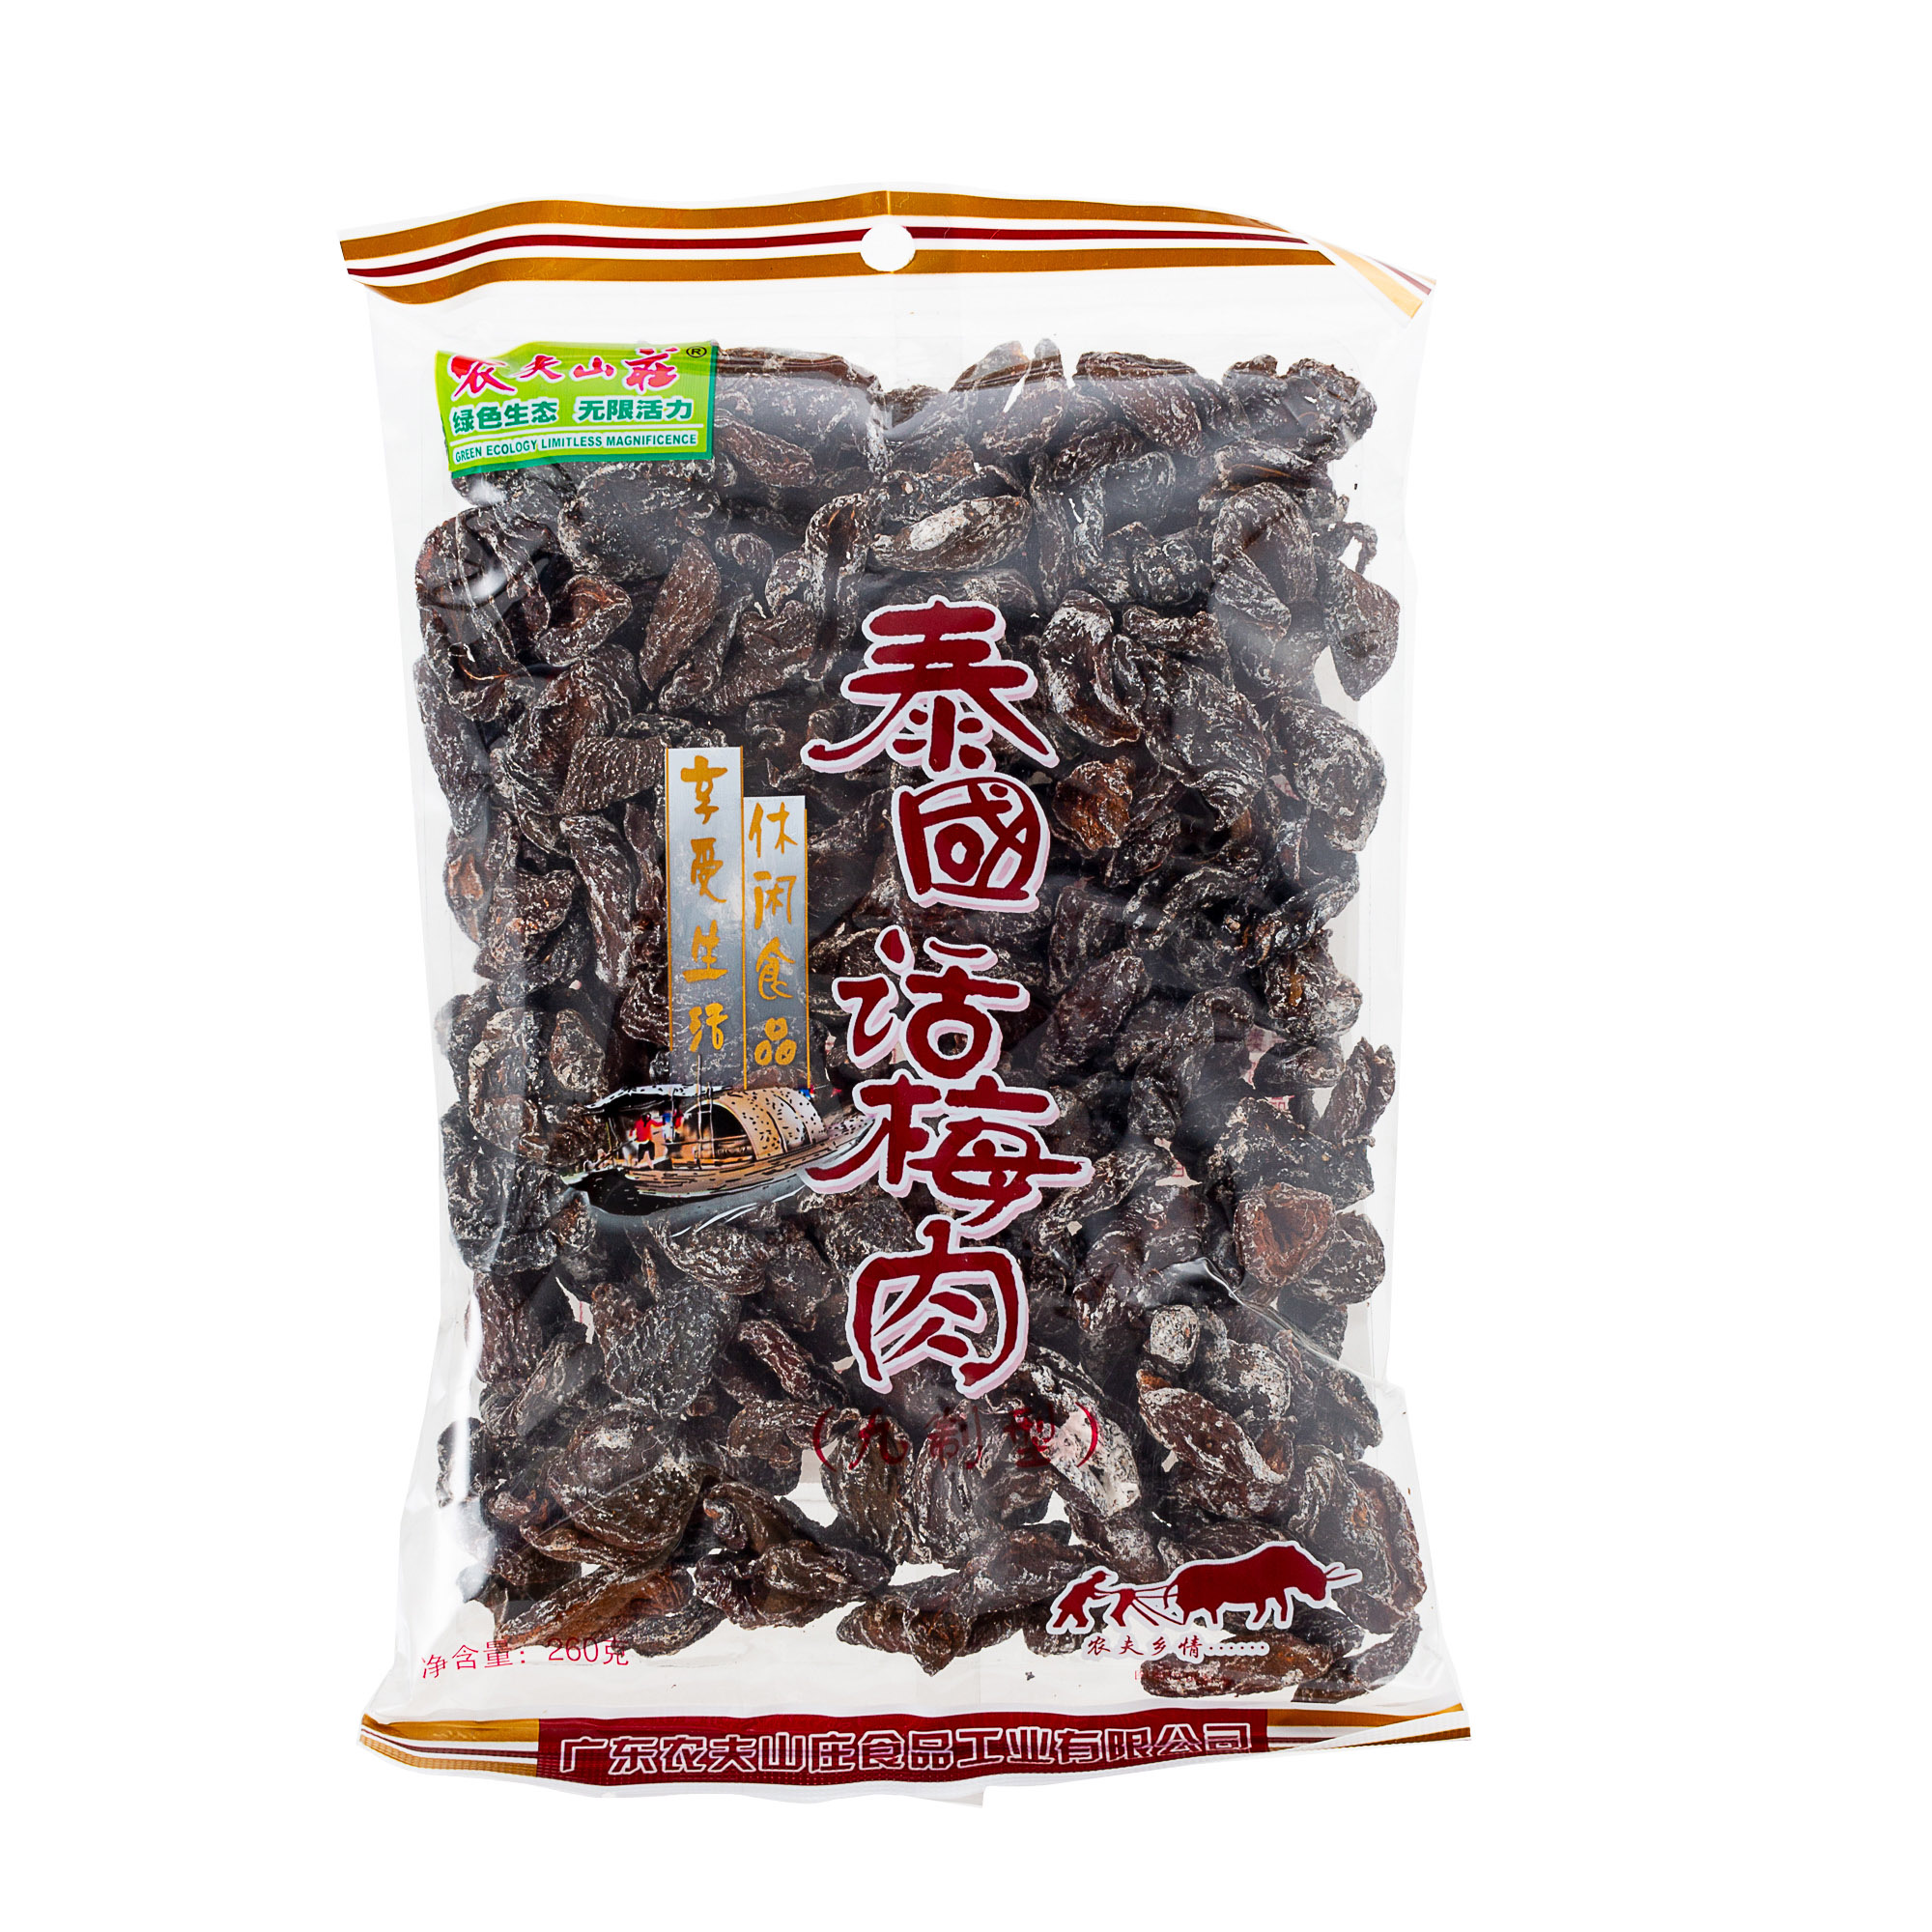 NNongfu Spring Thai Preserved Plum with Meat 236g-eBest-Nuts & Dried Fruit,Snacks & Confectionery